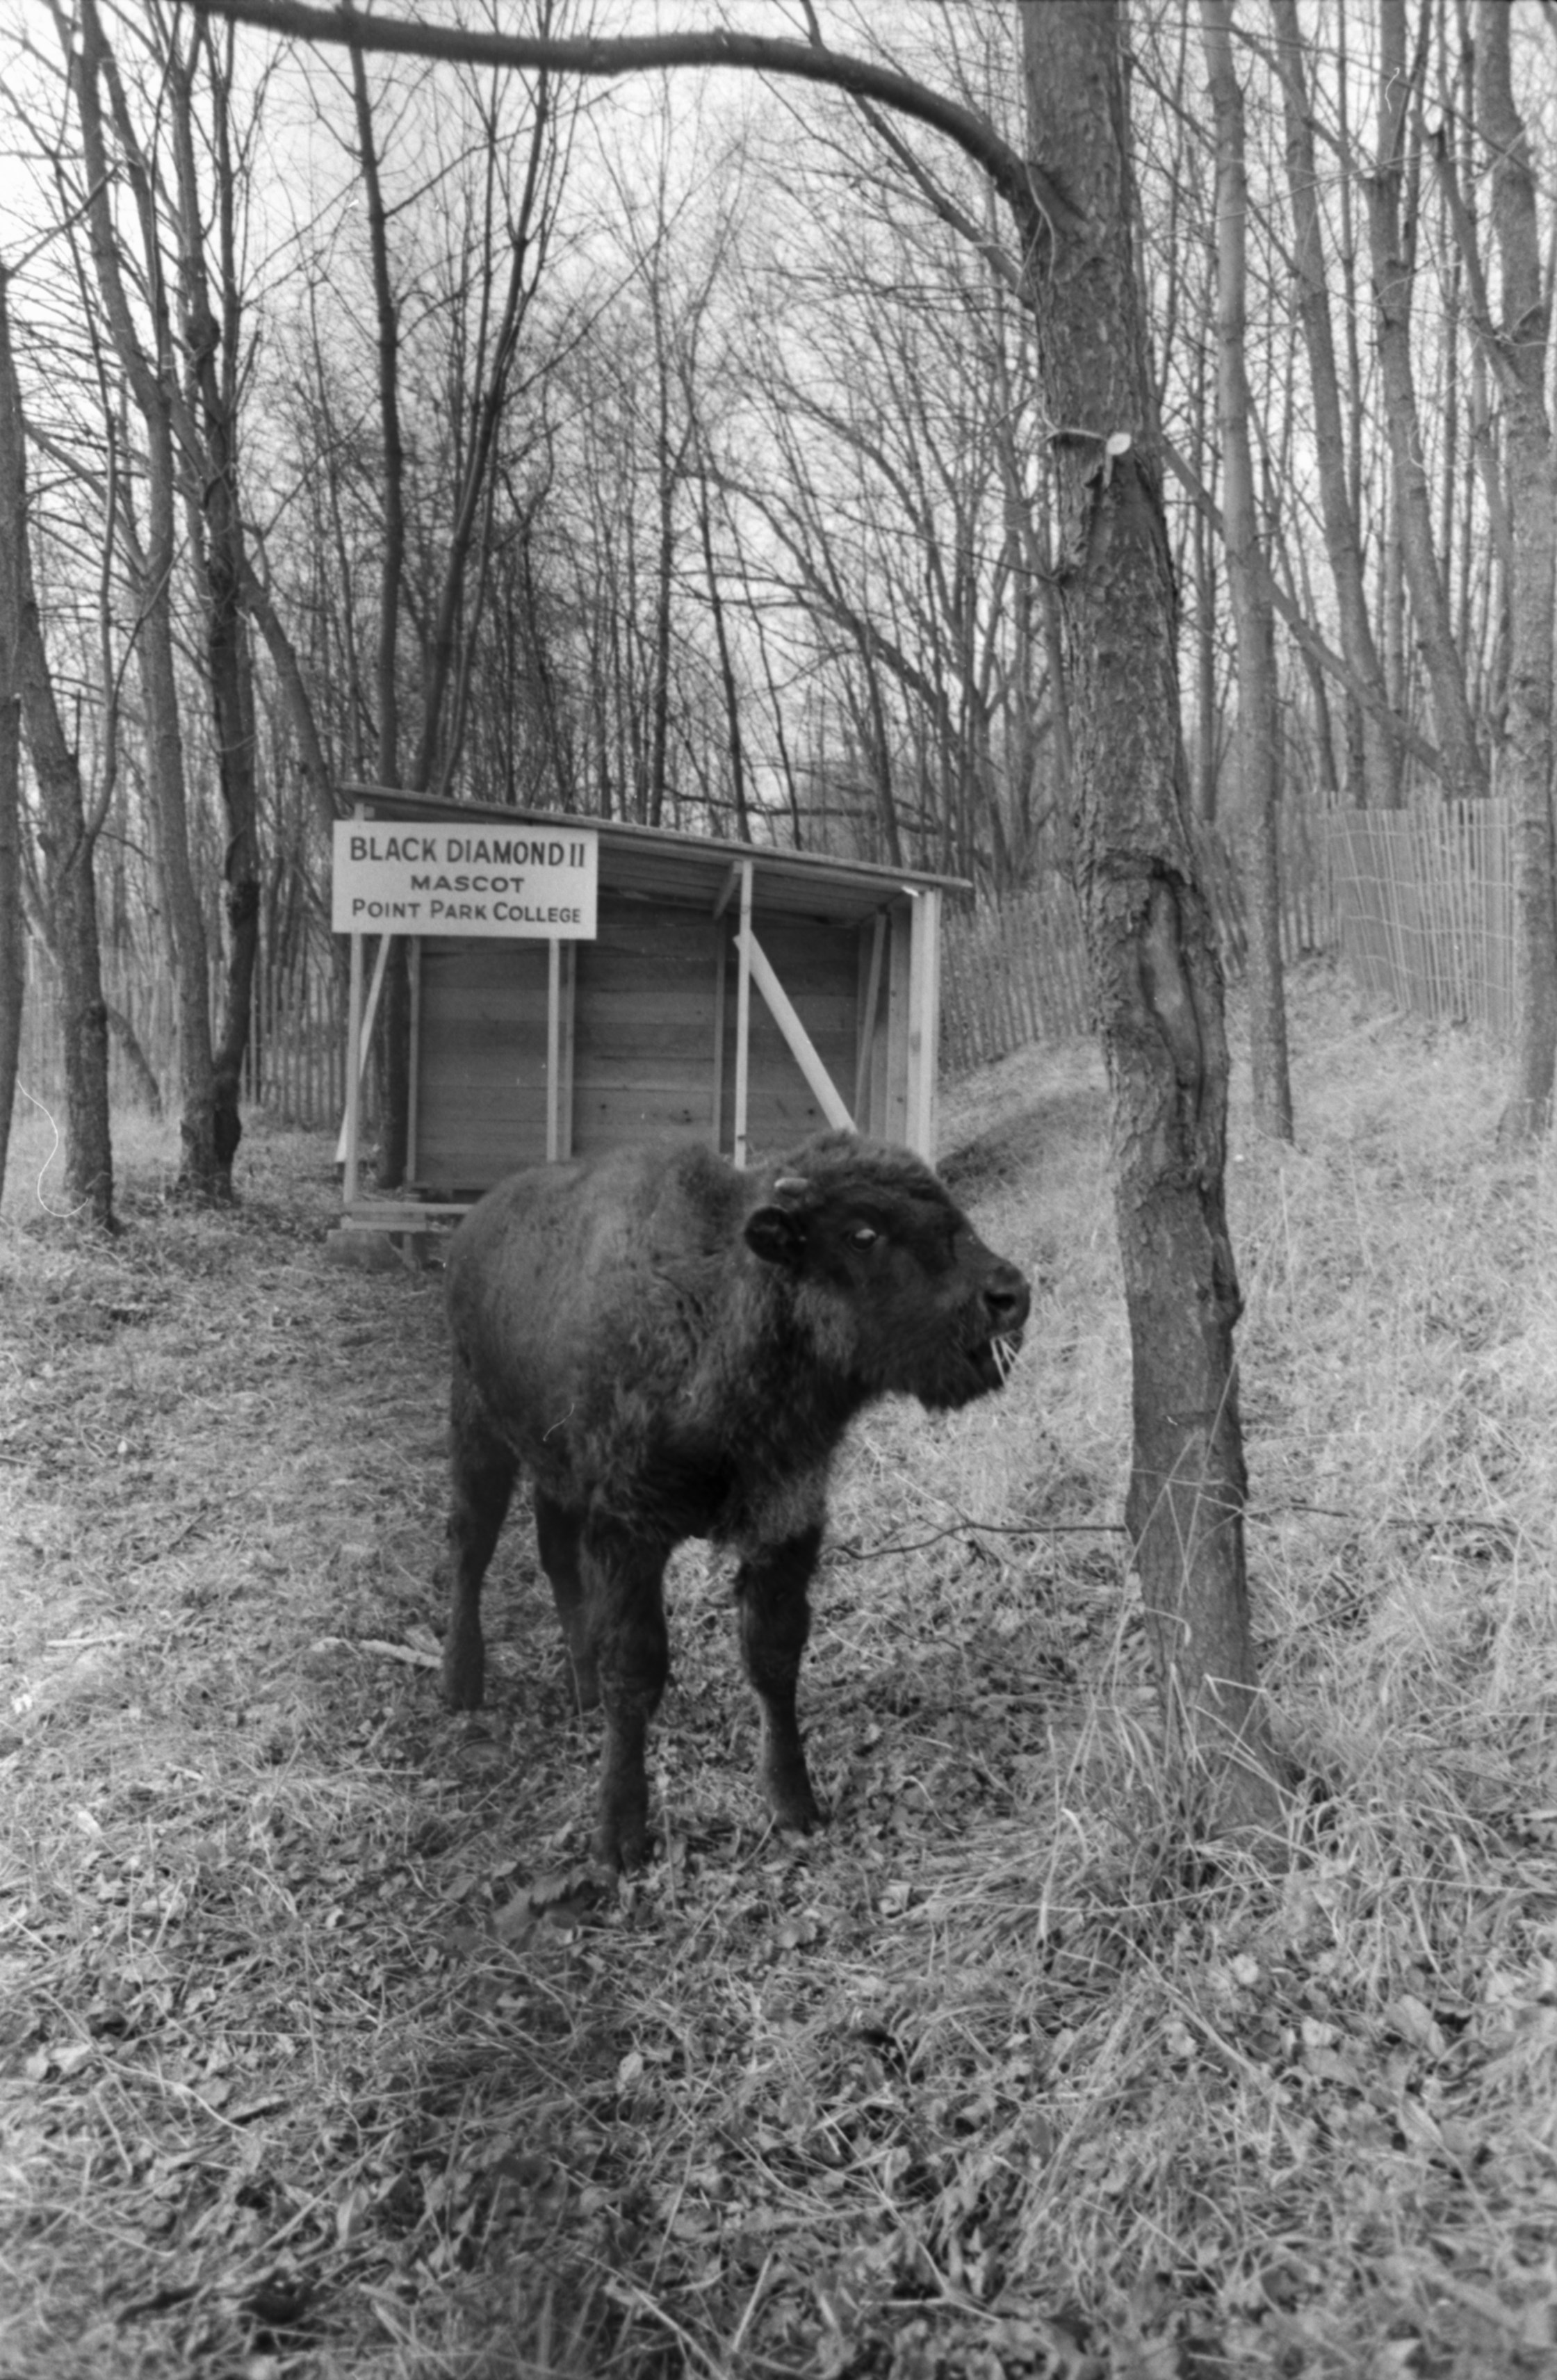 Black Diamond II, Mascot of Point Park College in his home at Pittsburgh’s South Park. ca. 1968